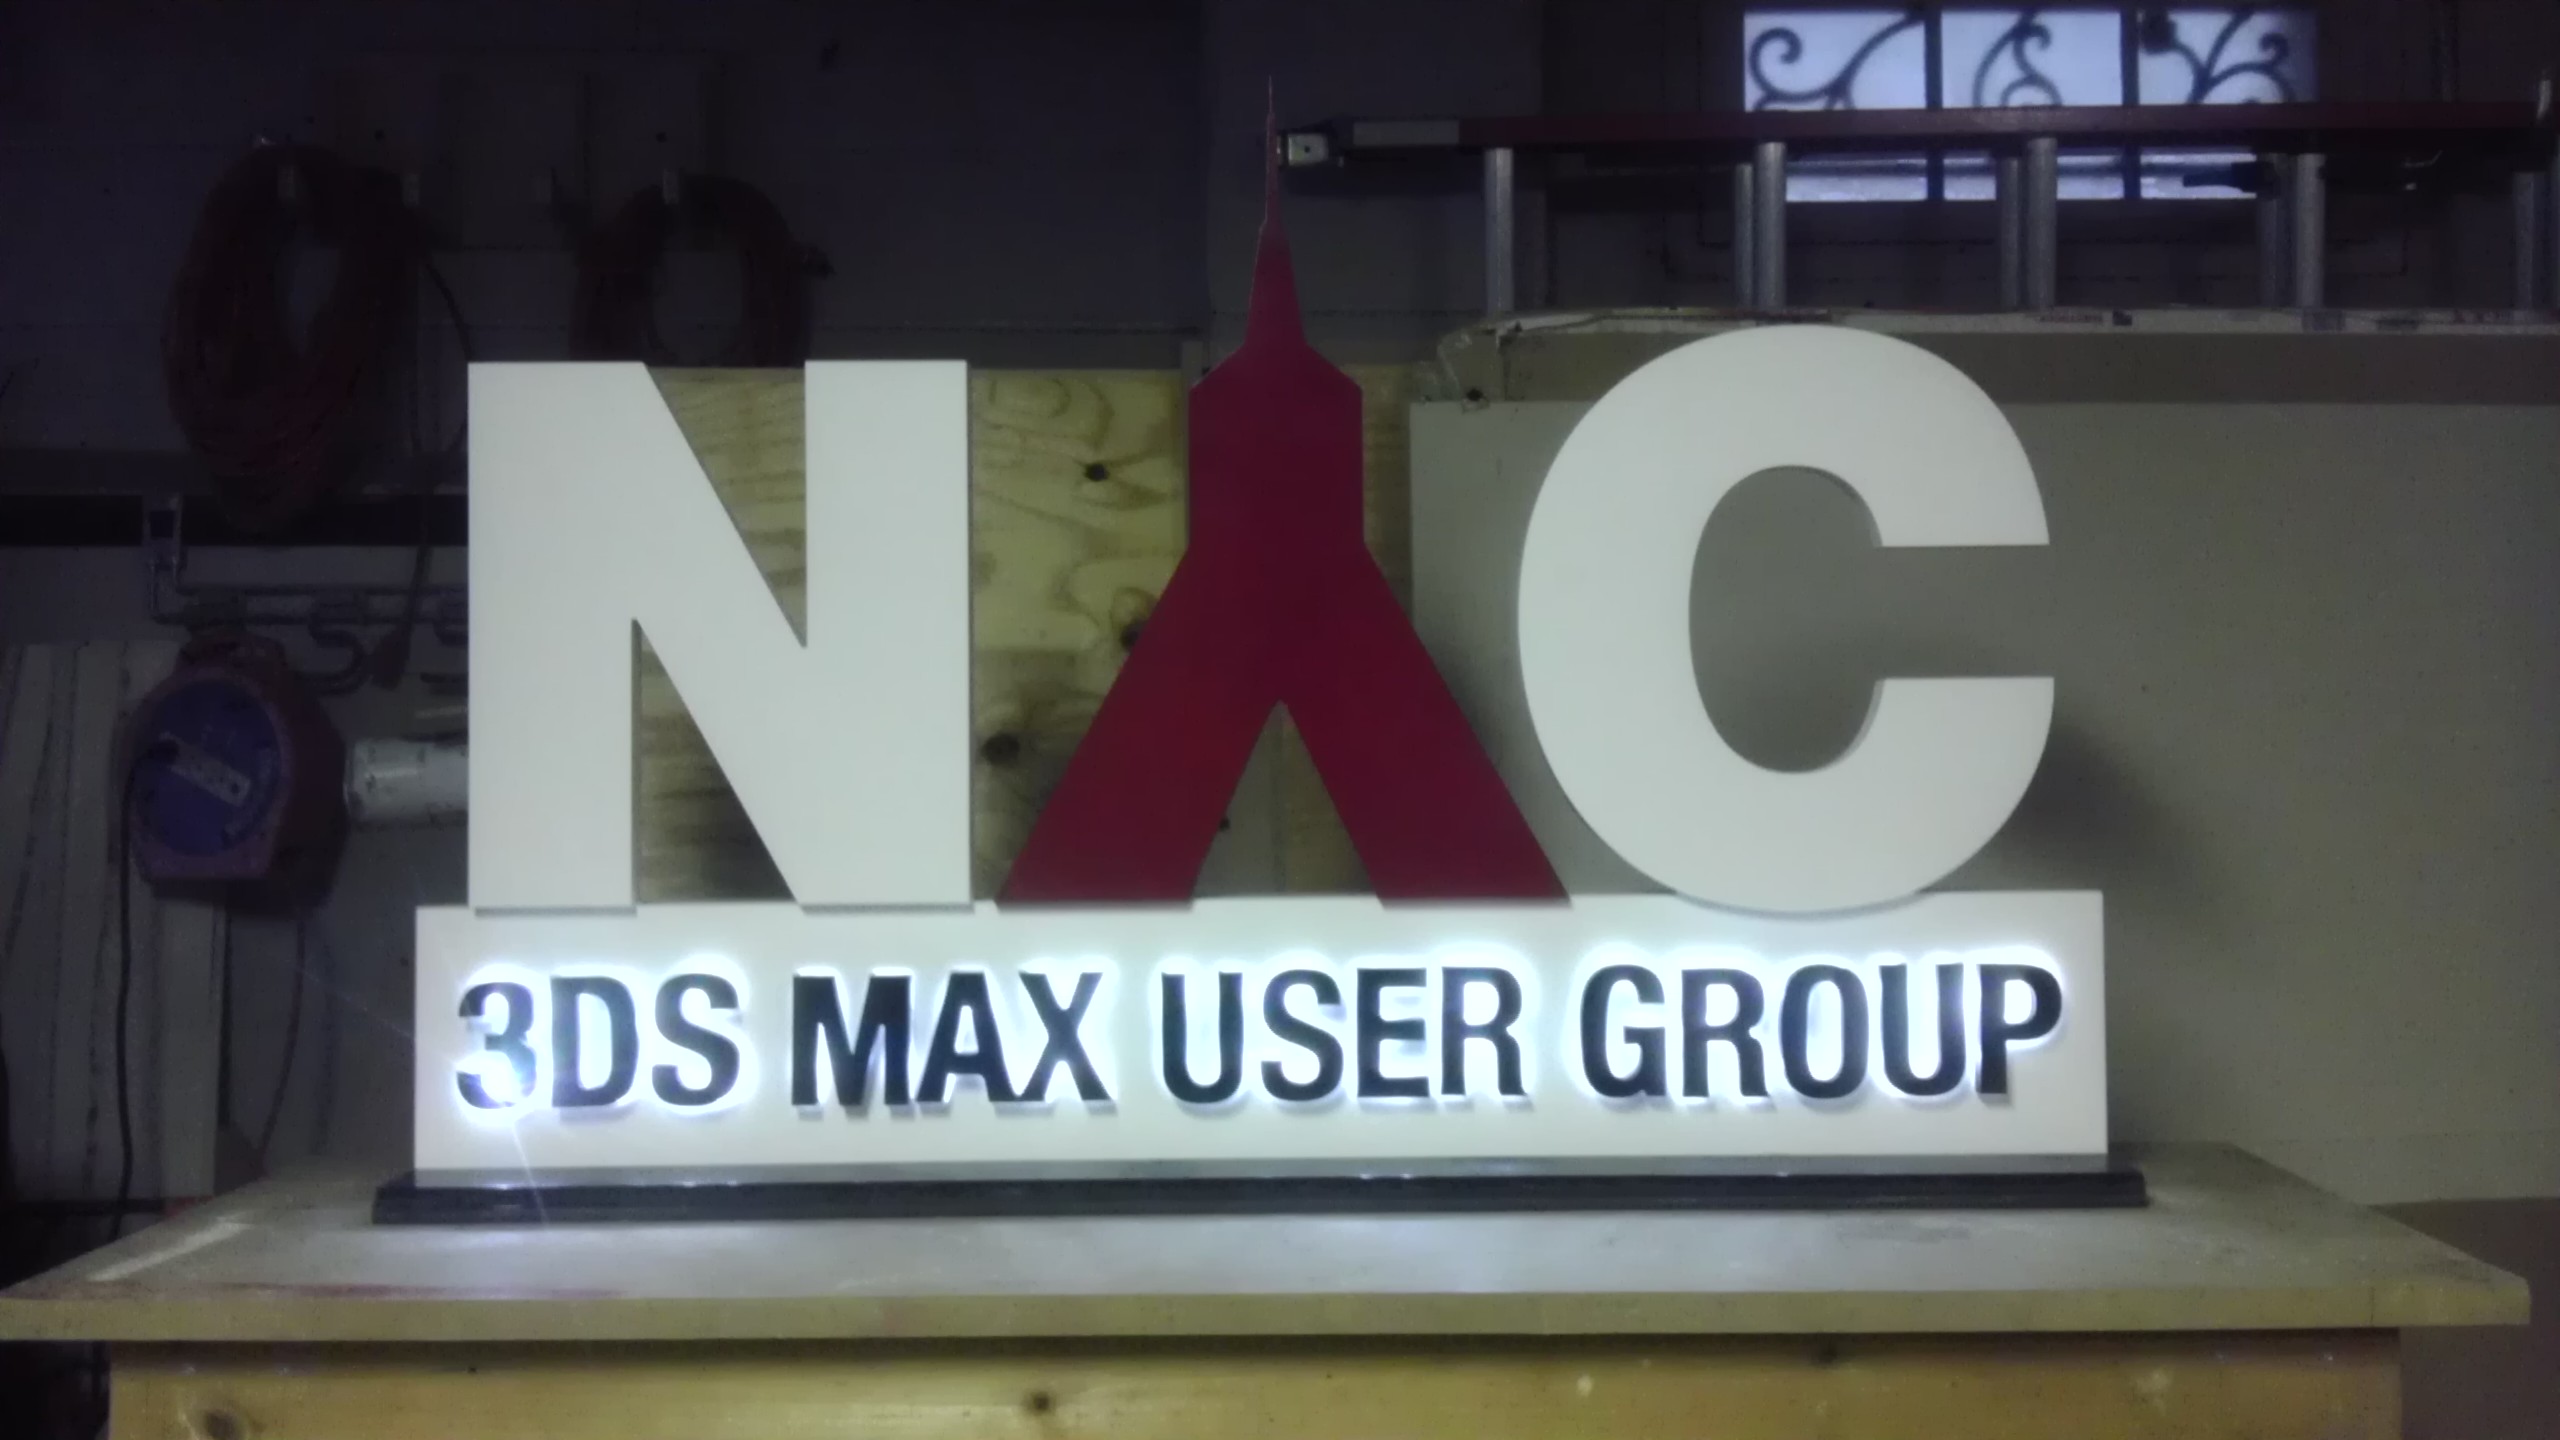 Signage for NYC 3ds Max User Group with lighting effects